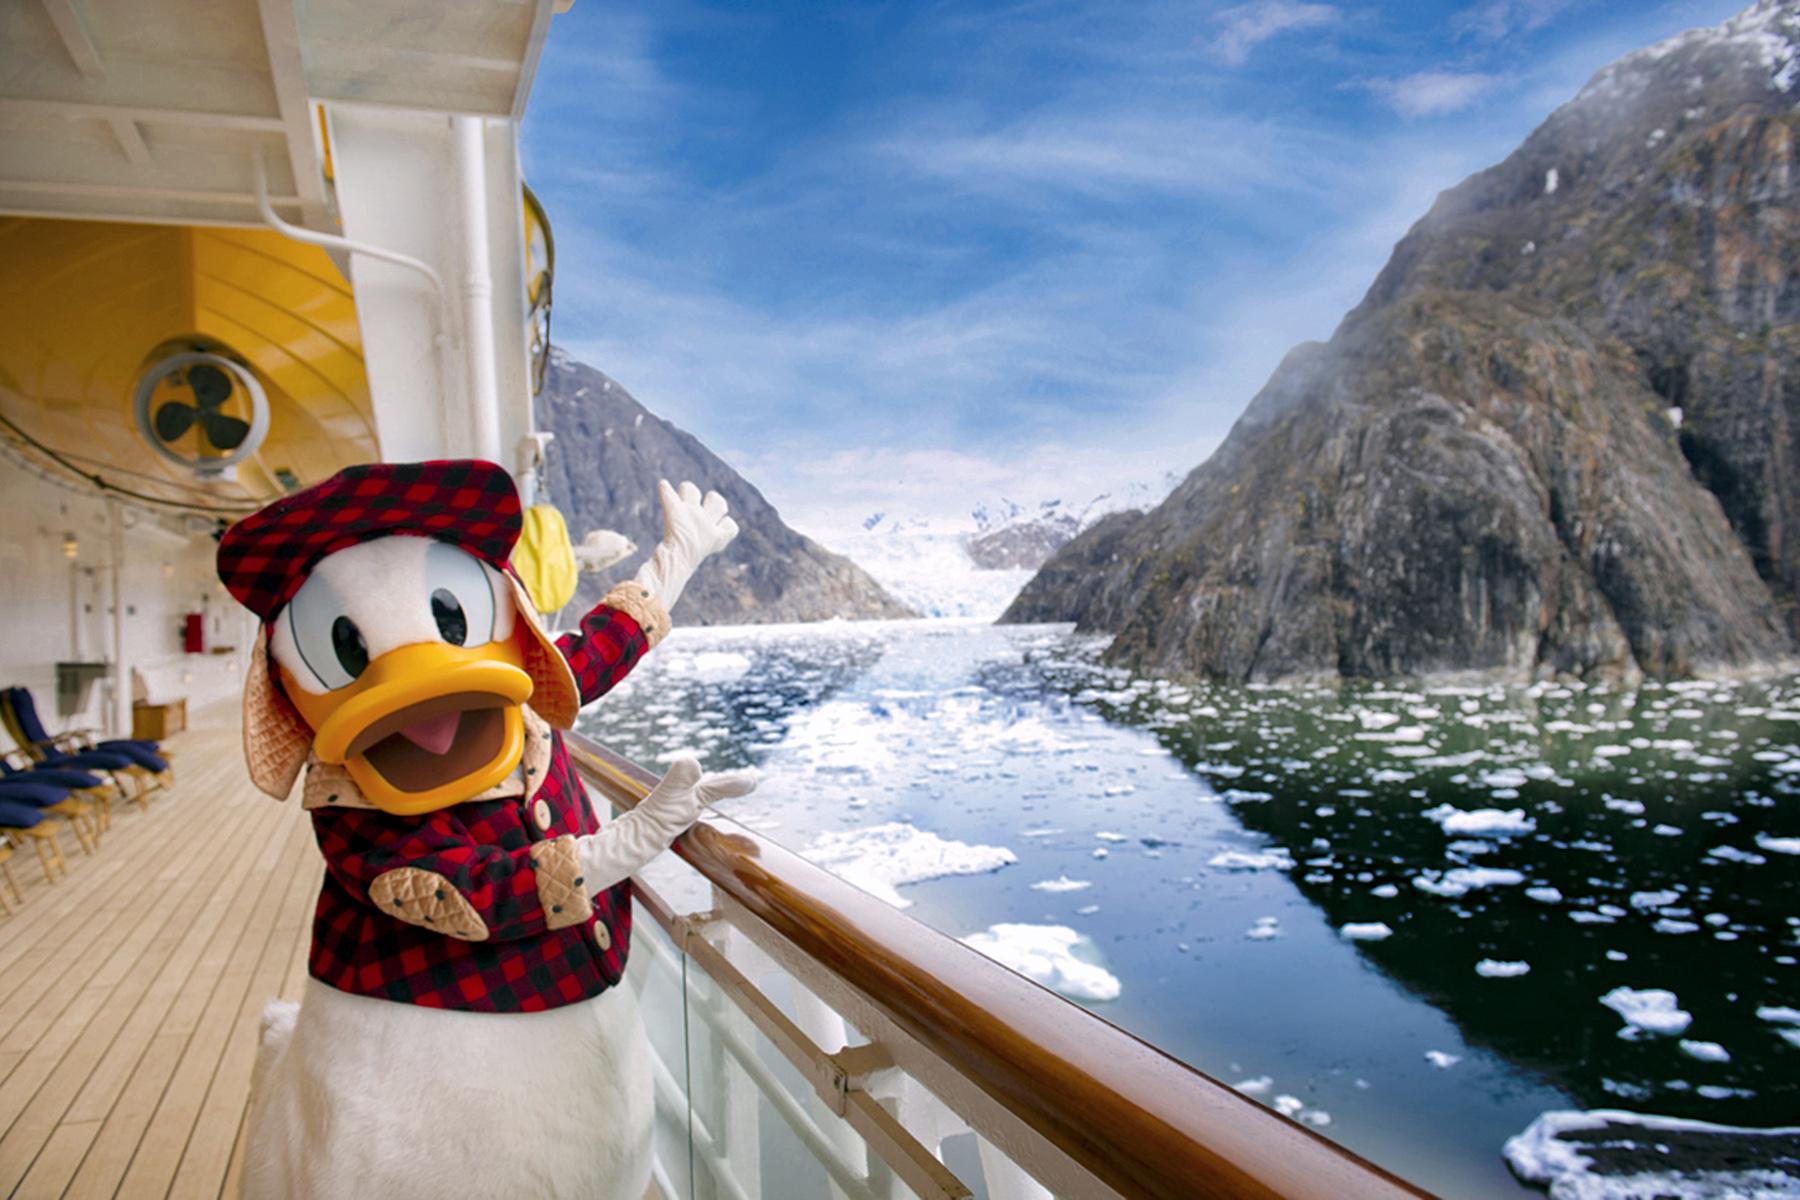 Disney Offers the Best Alaska Cruise Vacation for Families with Kids